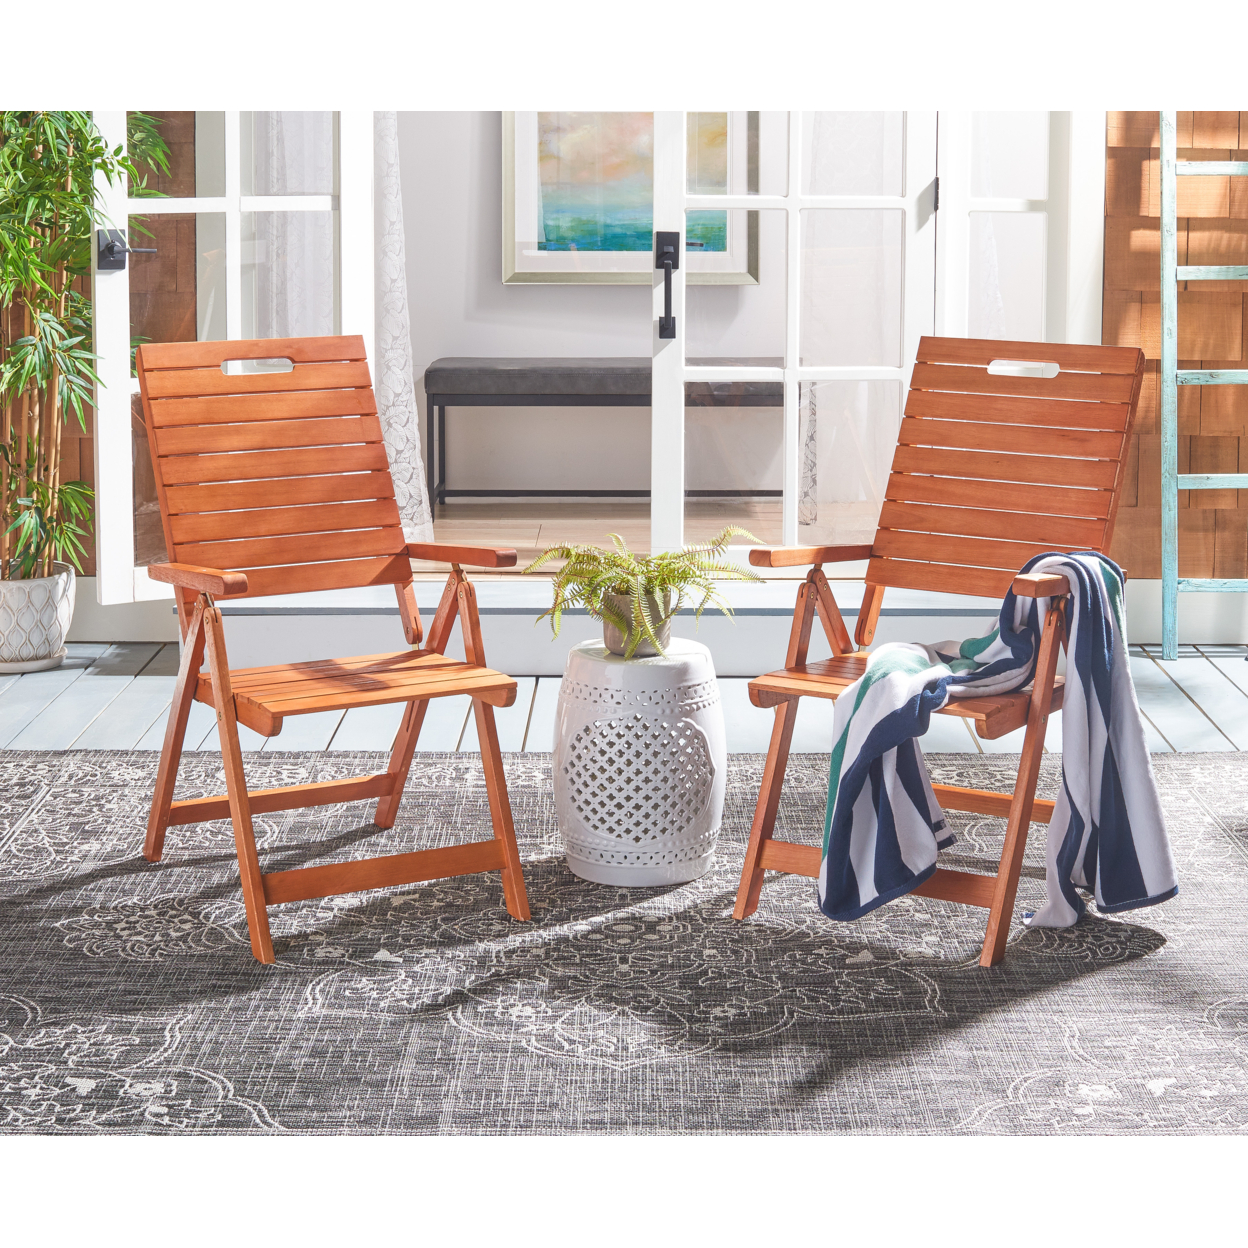 SAFAVIEH Outdoor Collection Rence Folding Chair Natural